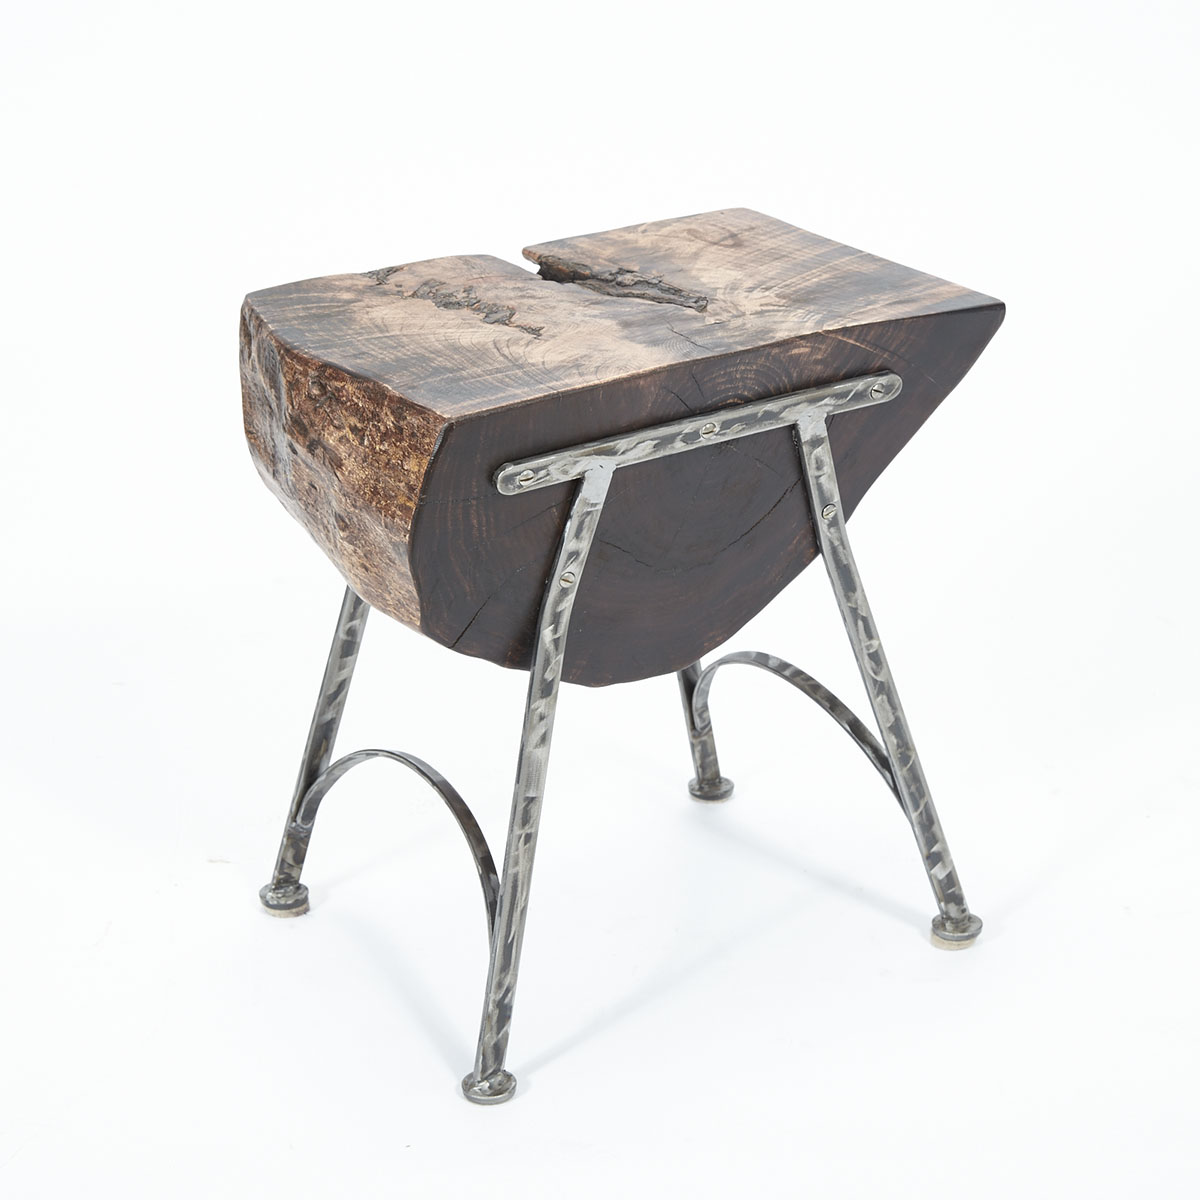 Contemporary Cherry Free Edge Log Table/ Stool on Wrought Iron Stand